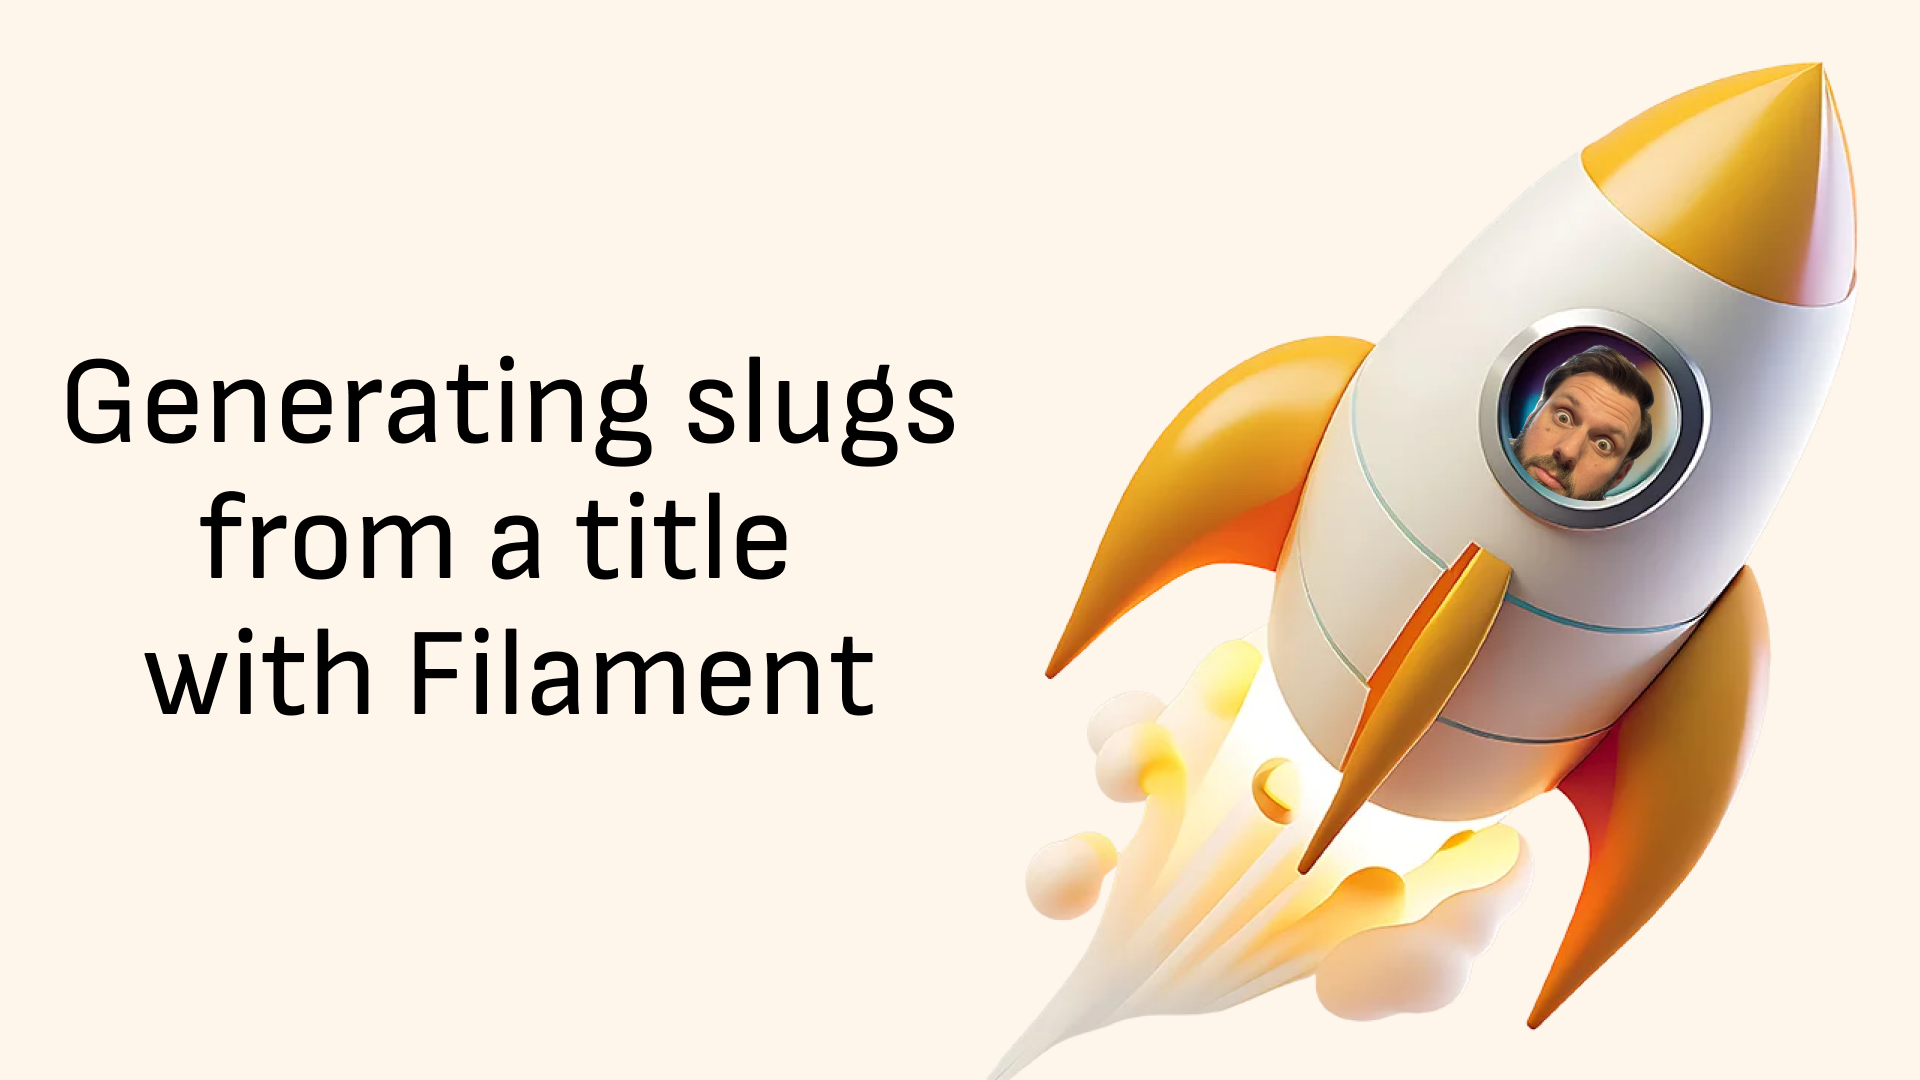 Generating slugs from a title in Filament image